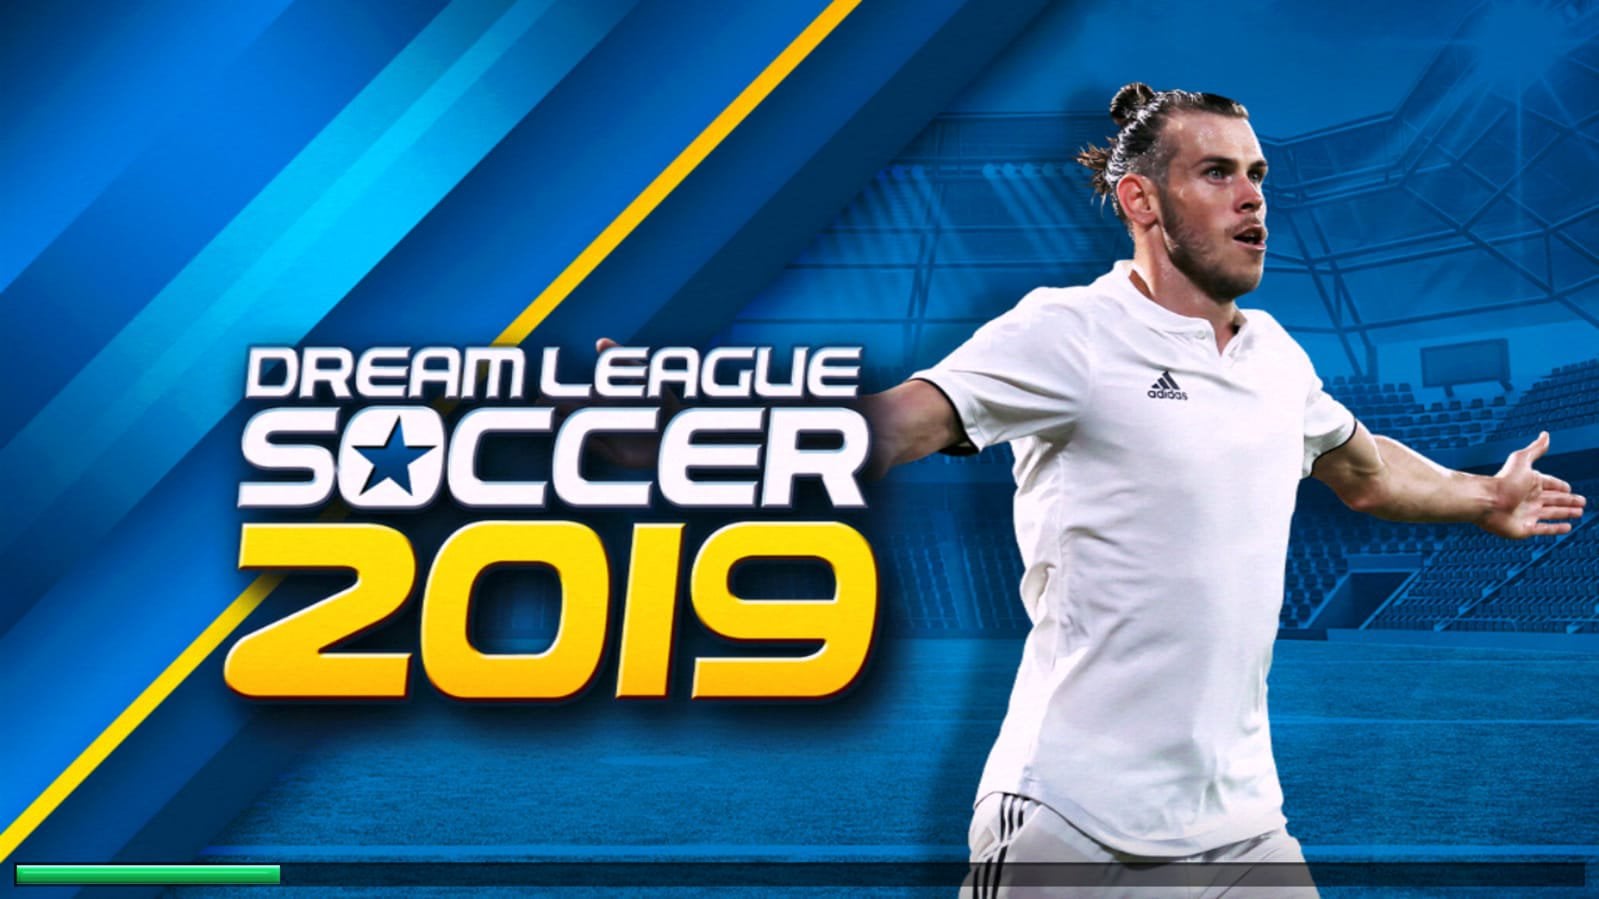 Dream League Soccer 2019 Pc Game Full Version Game Free Download The Gamer Hq The Real Gaming Headquarters